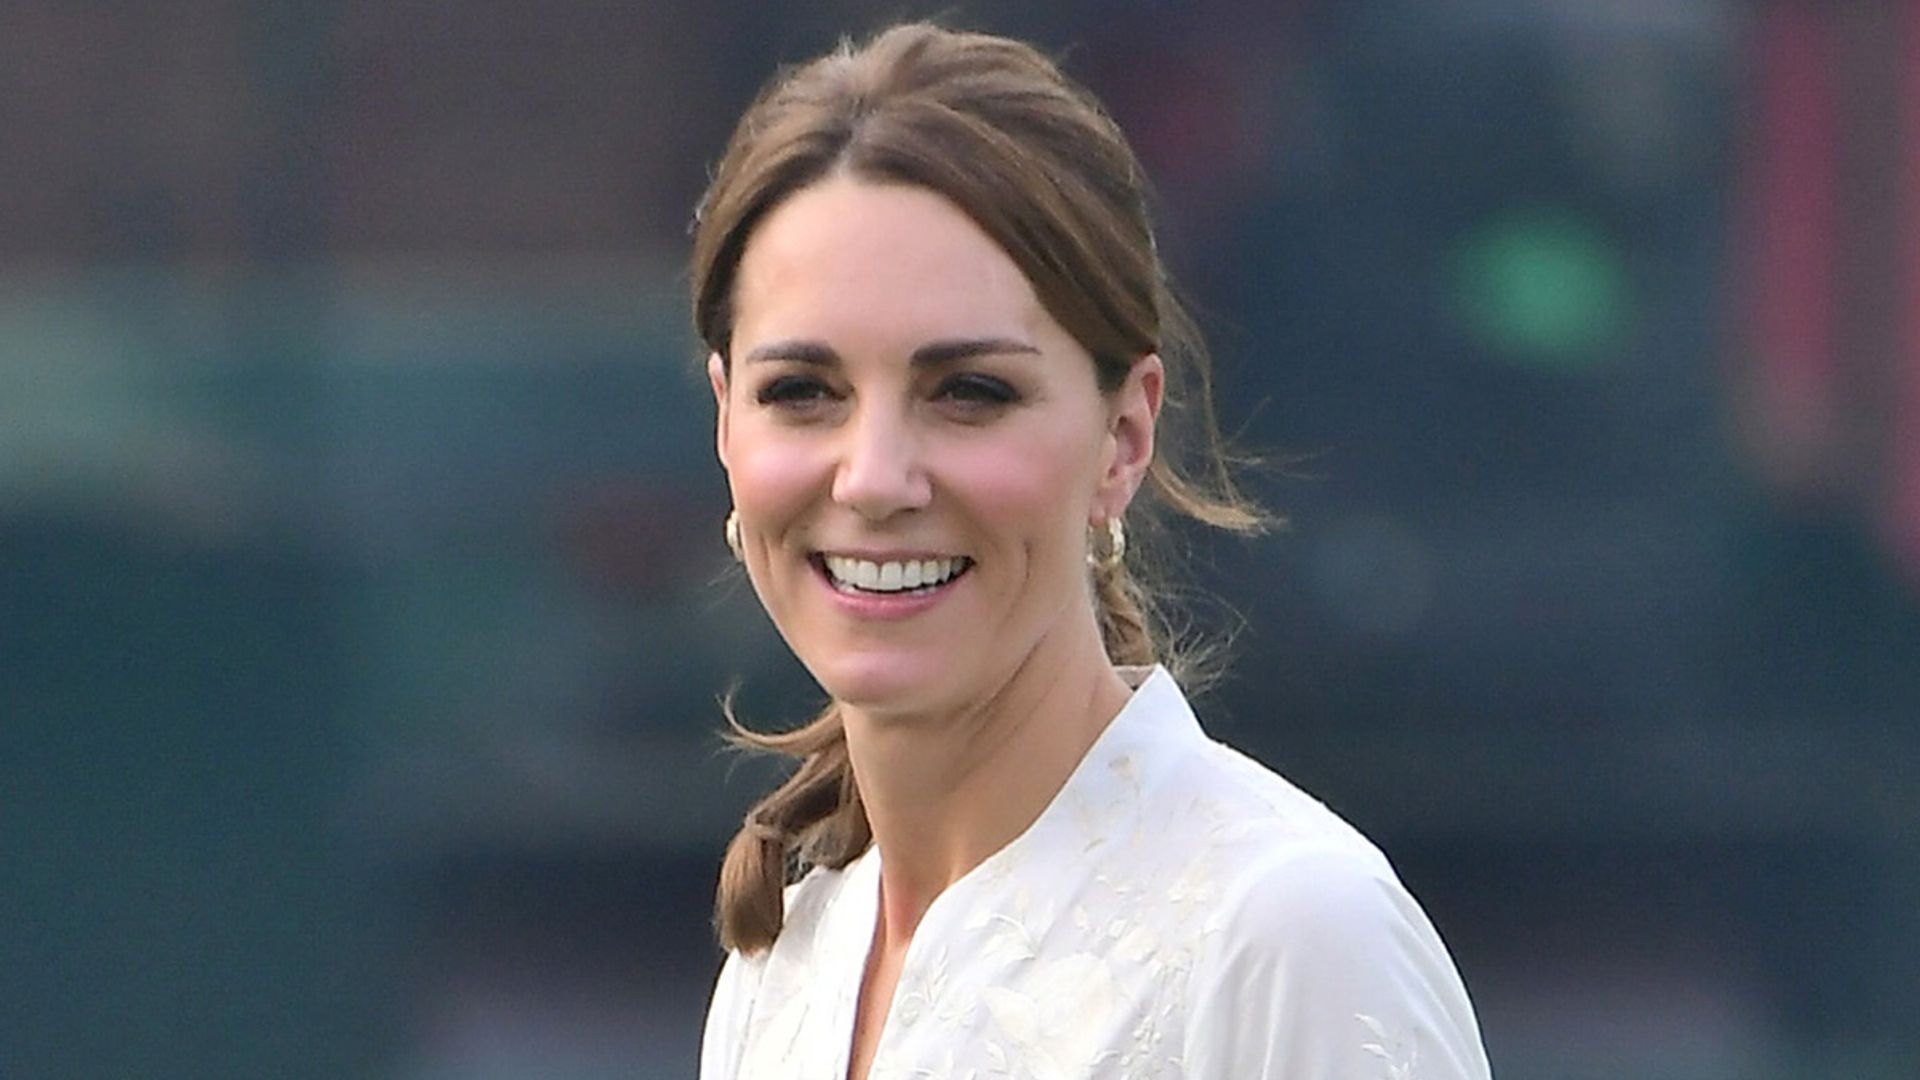 Kate Middleton ties hair up and sports trainers for the cricket